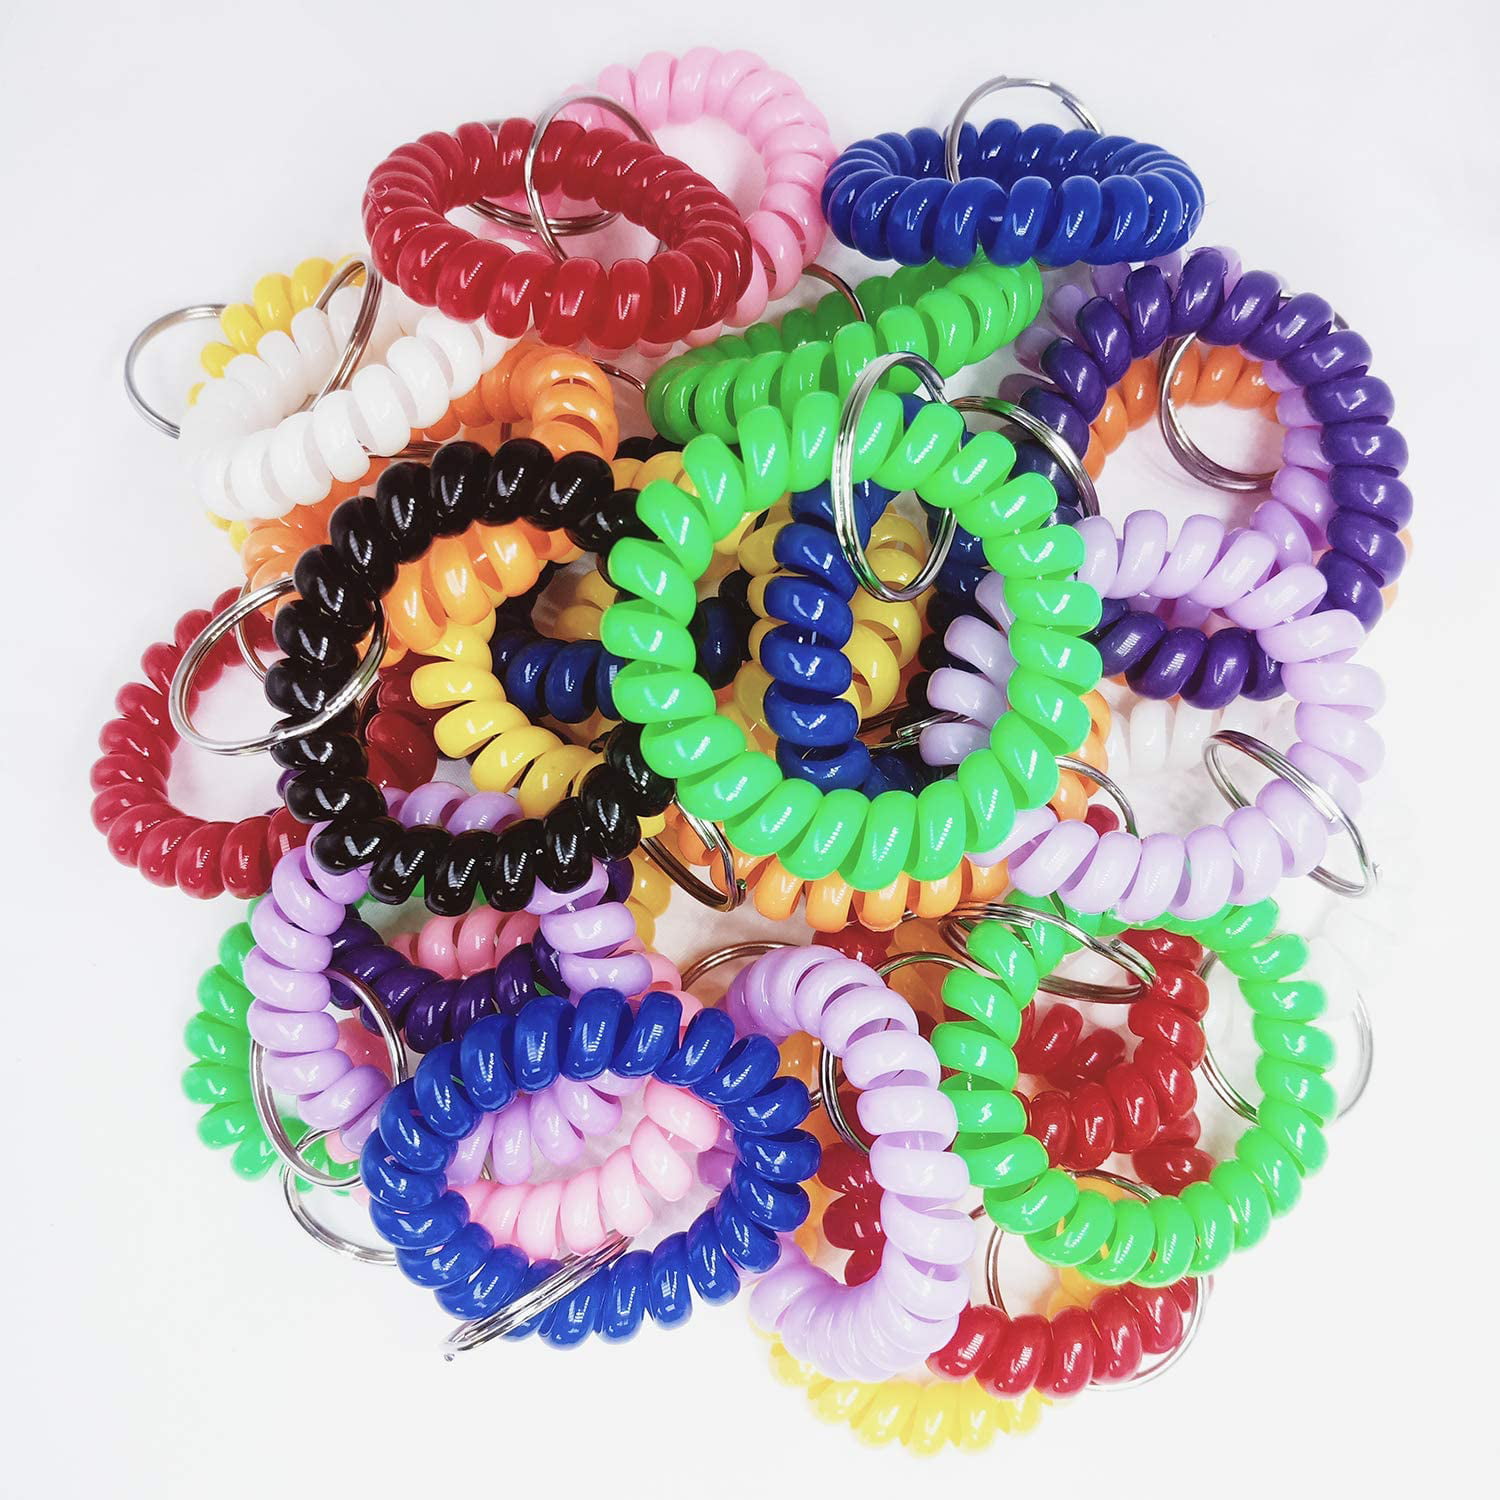 40 NEW SPIRAL WRIST COIL KEYCHAINS STRETCHABLE KEY RING WRIST BAND KEY CHAIN 